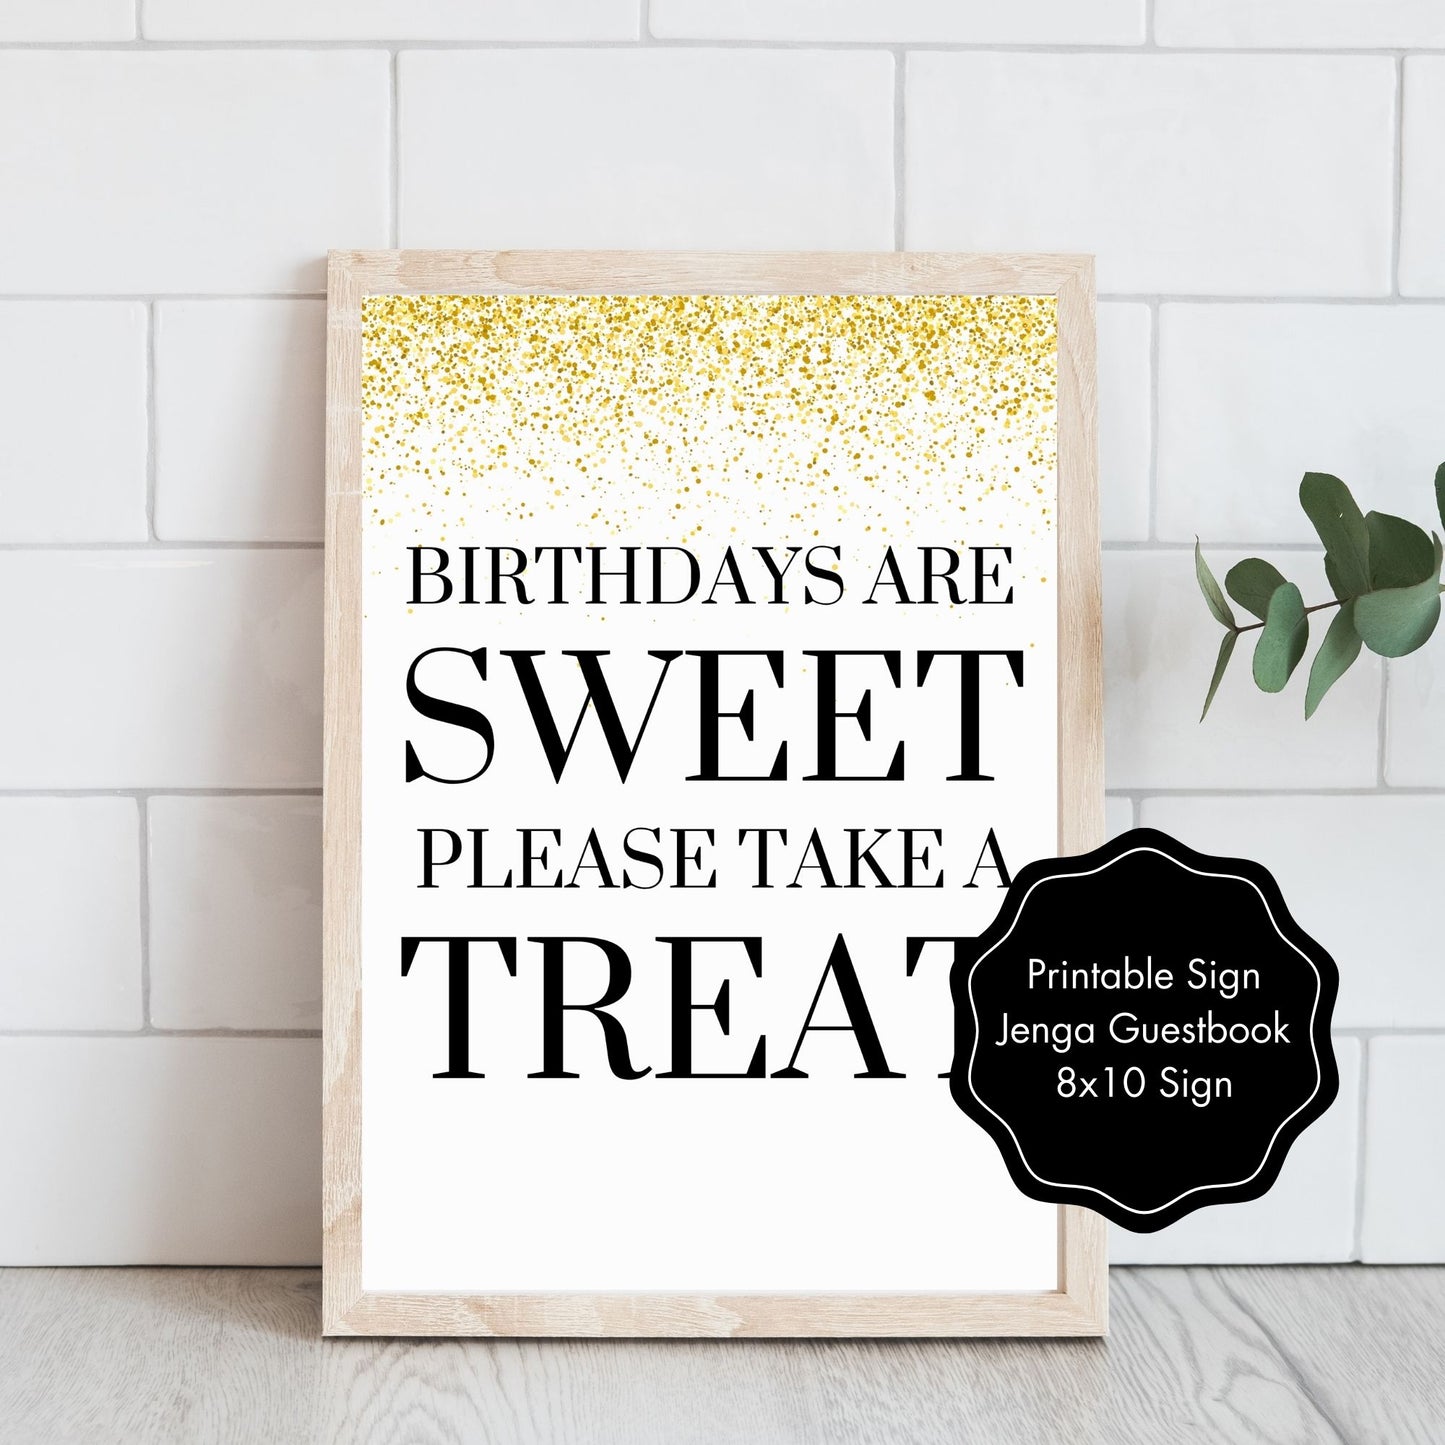 Birthdays are Sweet Please Take a Treat Sign 8x10